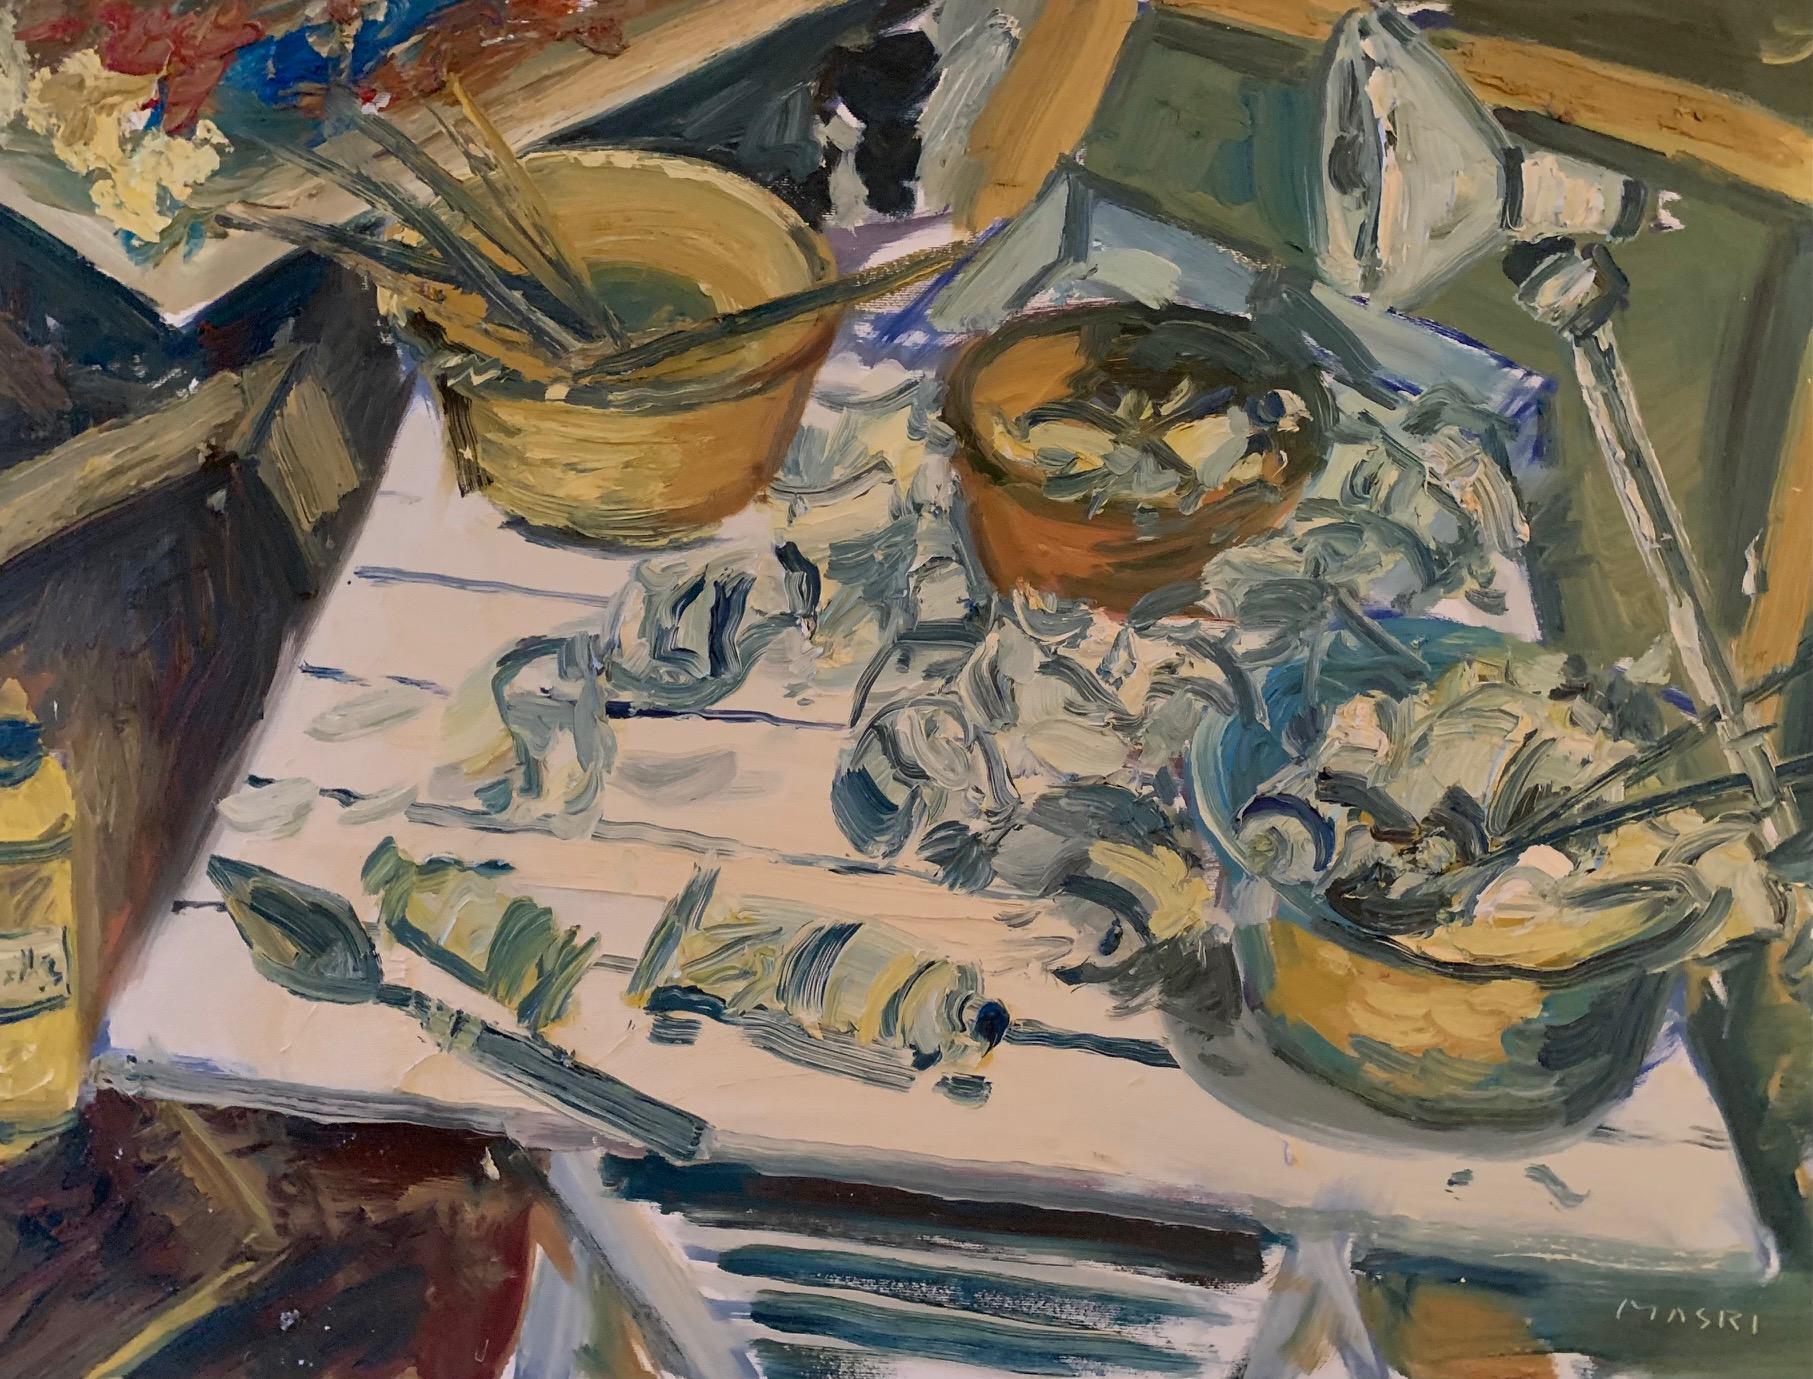 Masri Hayssam Still-Life Painting - "A Day At The Studio" Oil on Canvas 31.5"x24" by Masri